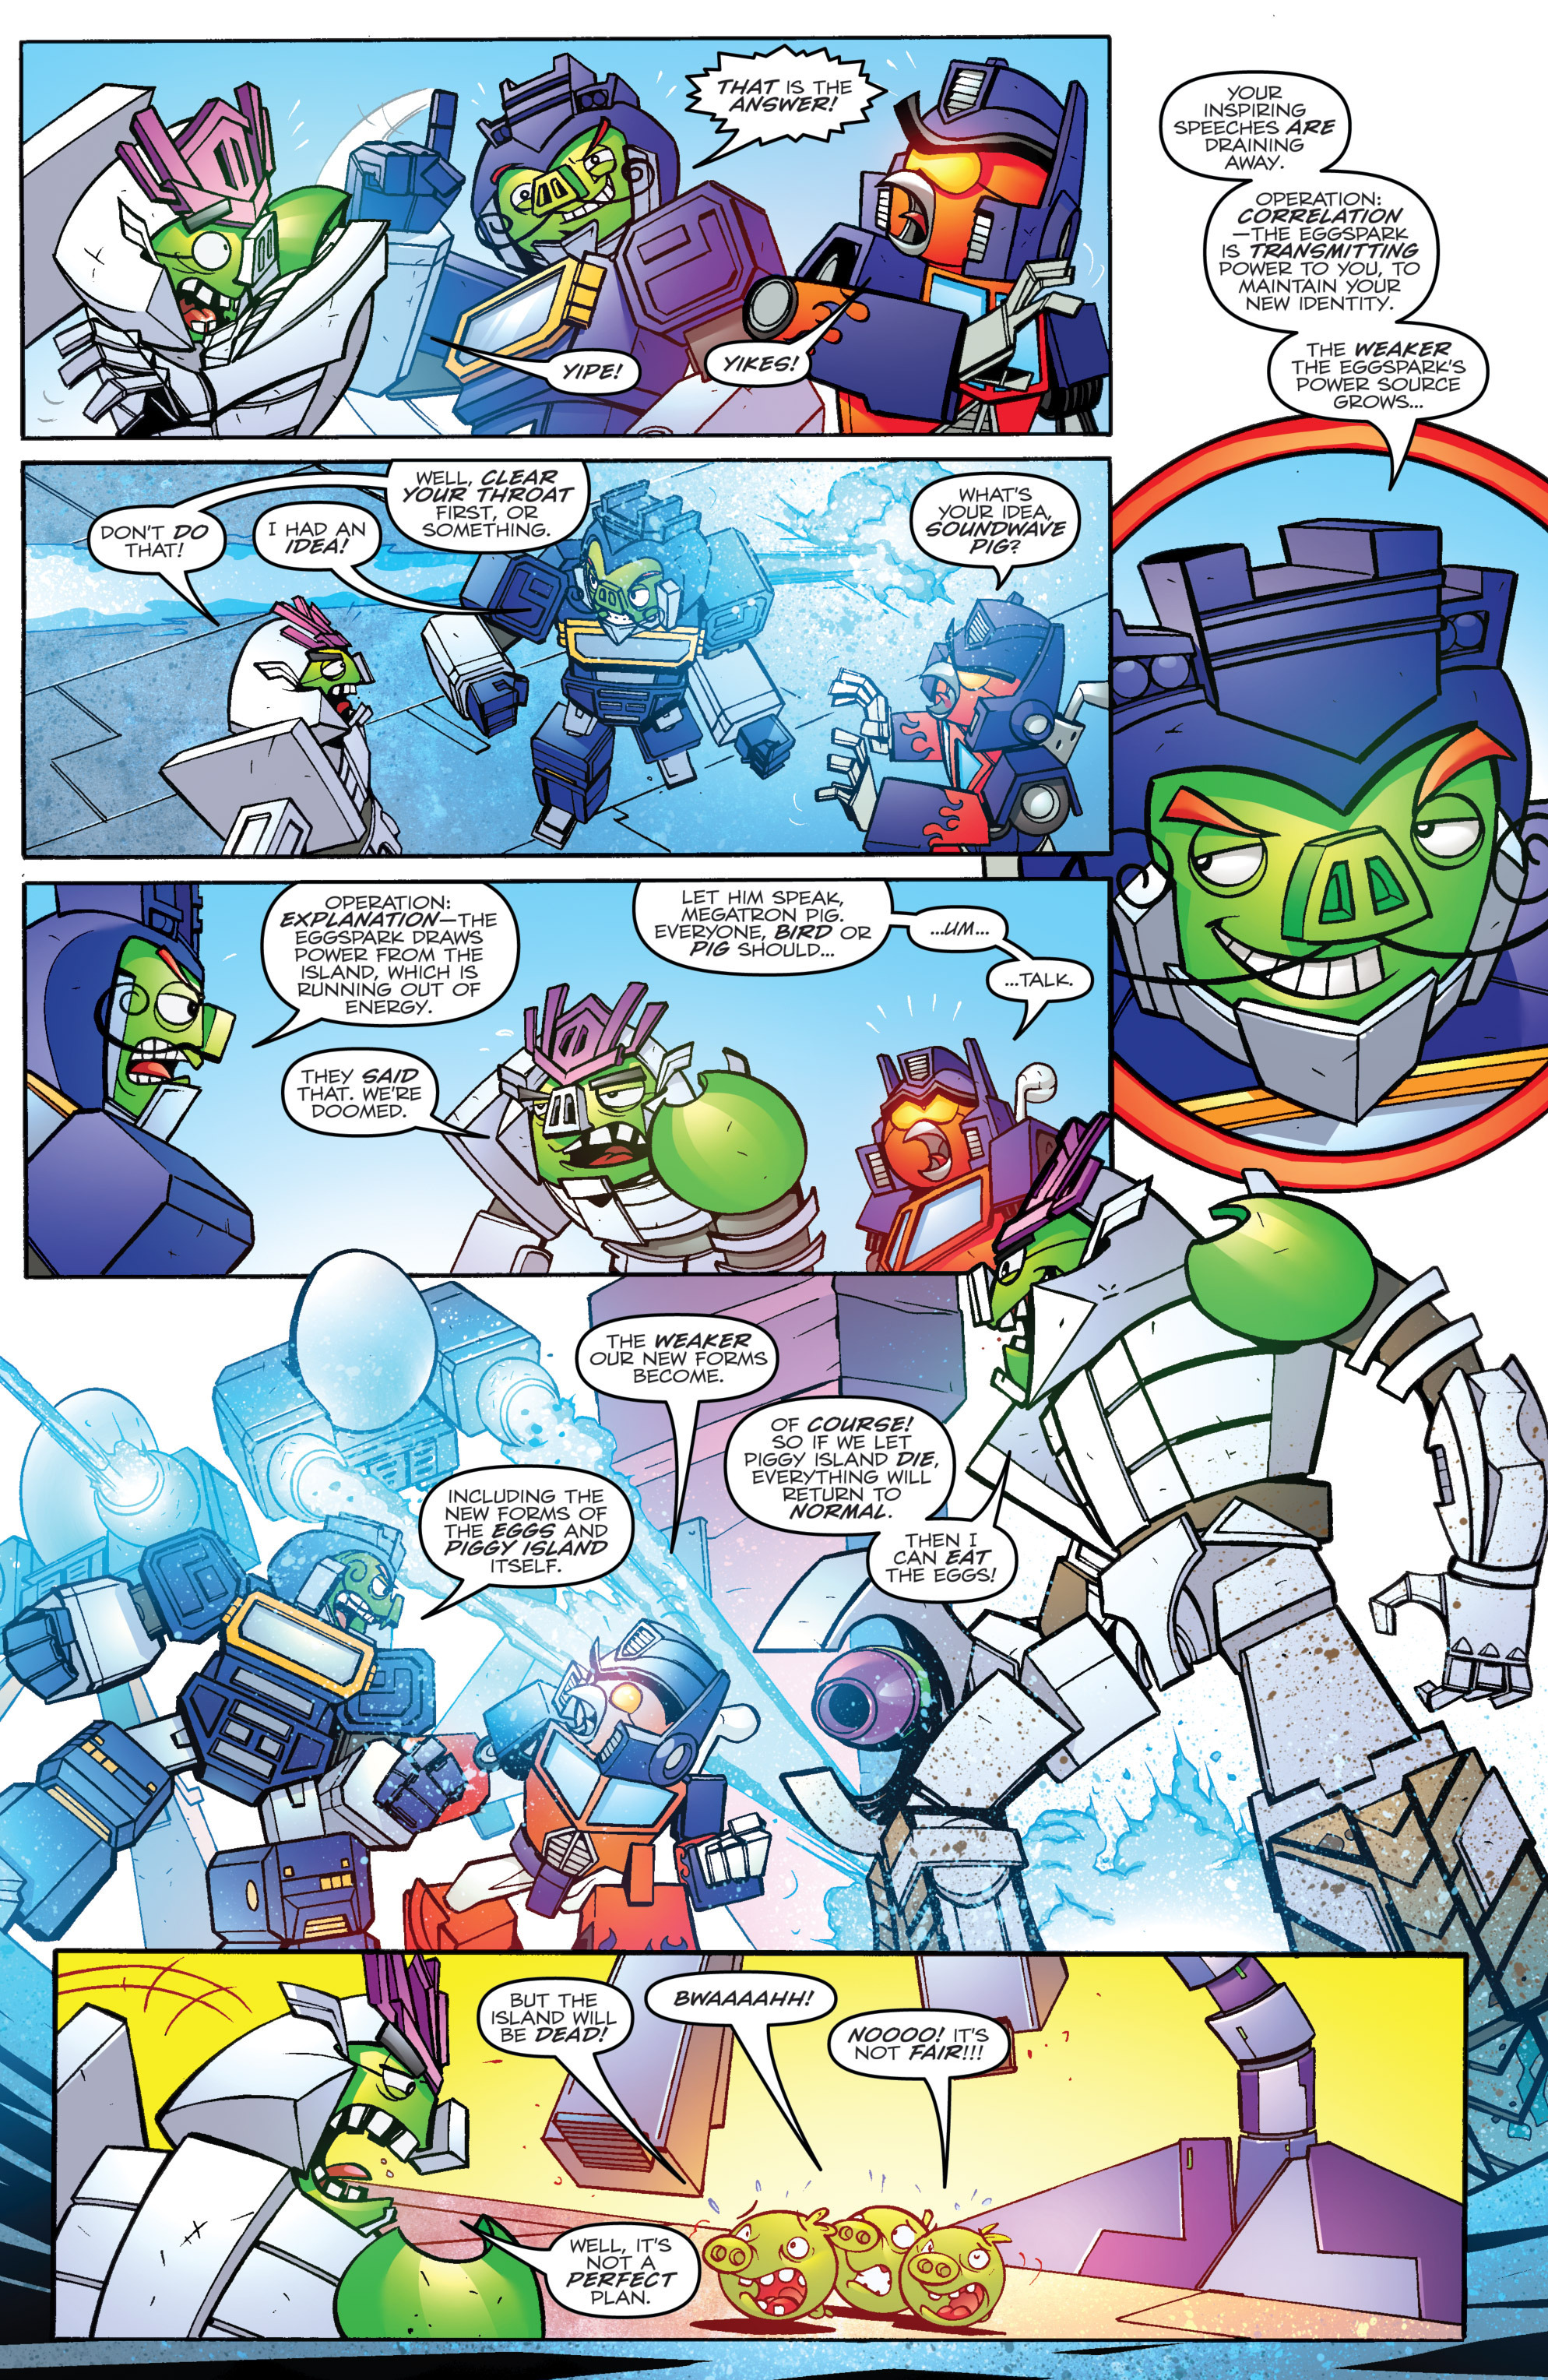 Read online Angry Birds Transformers comic -  Issue #4 - 4